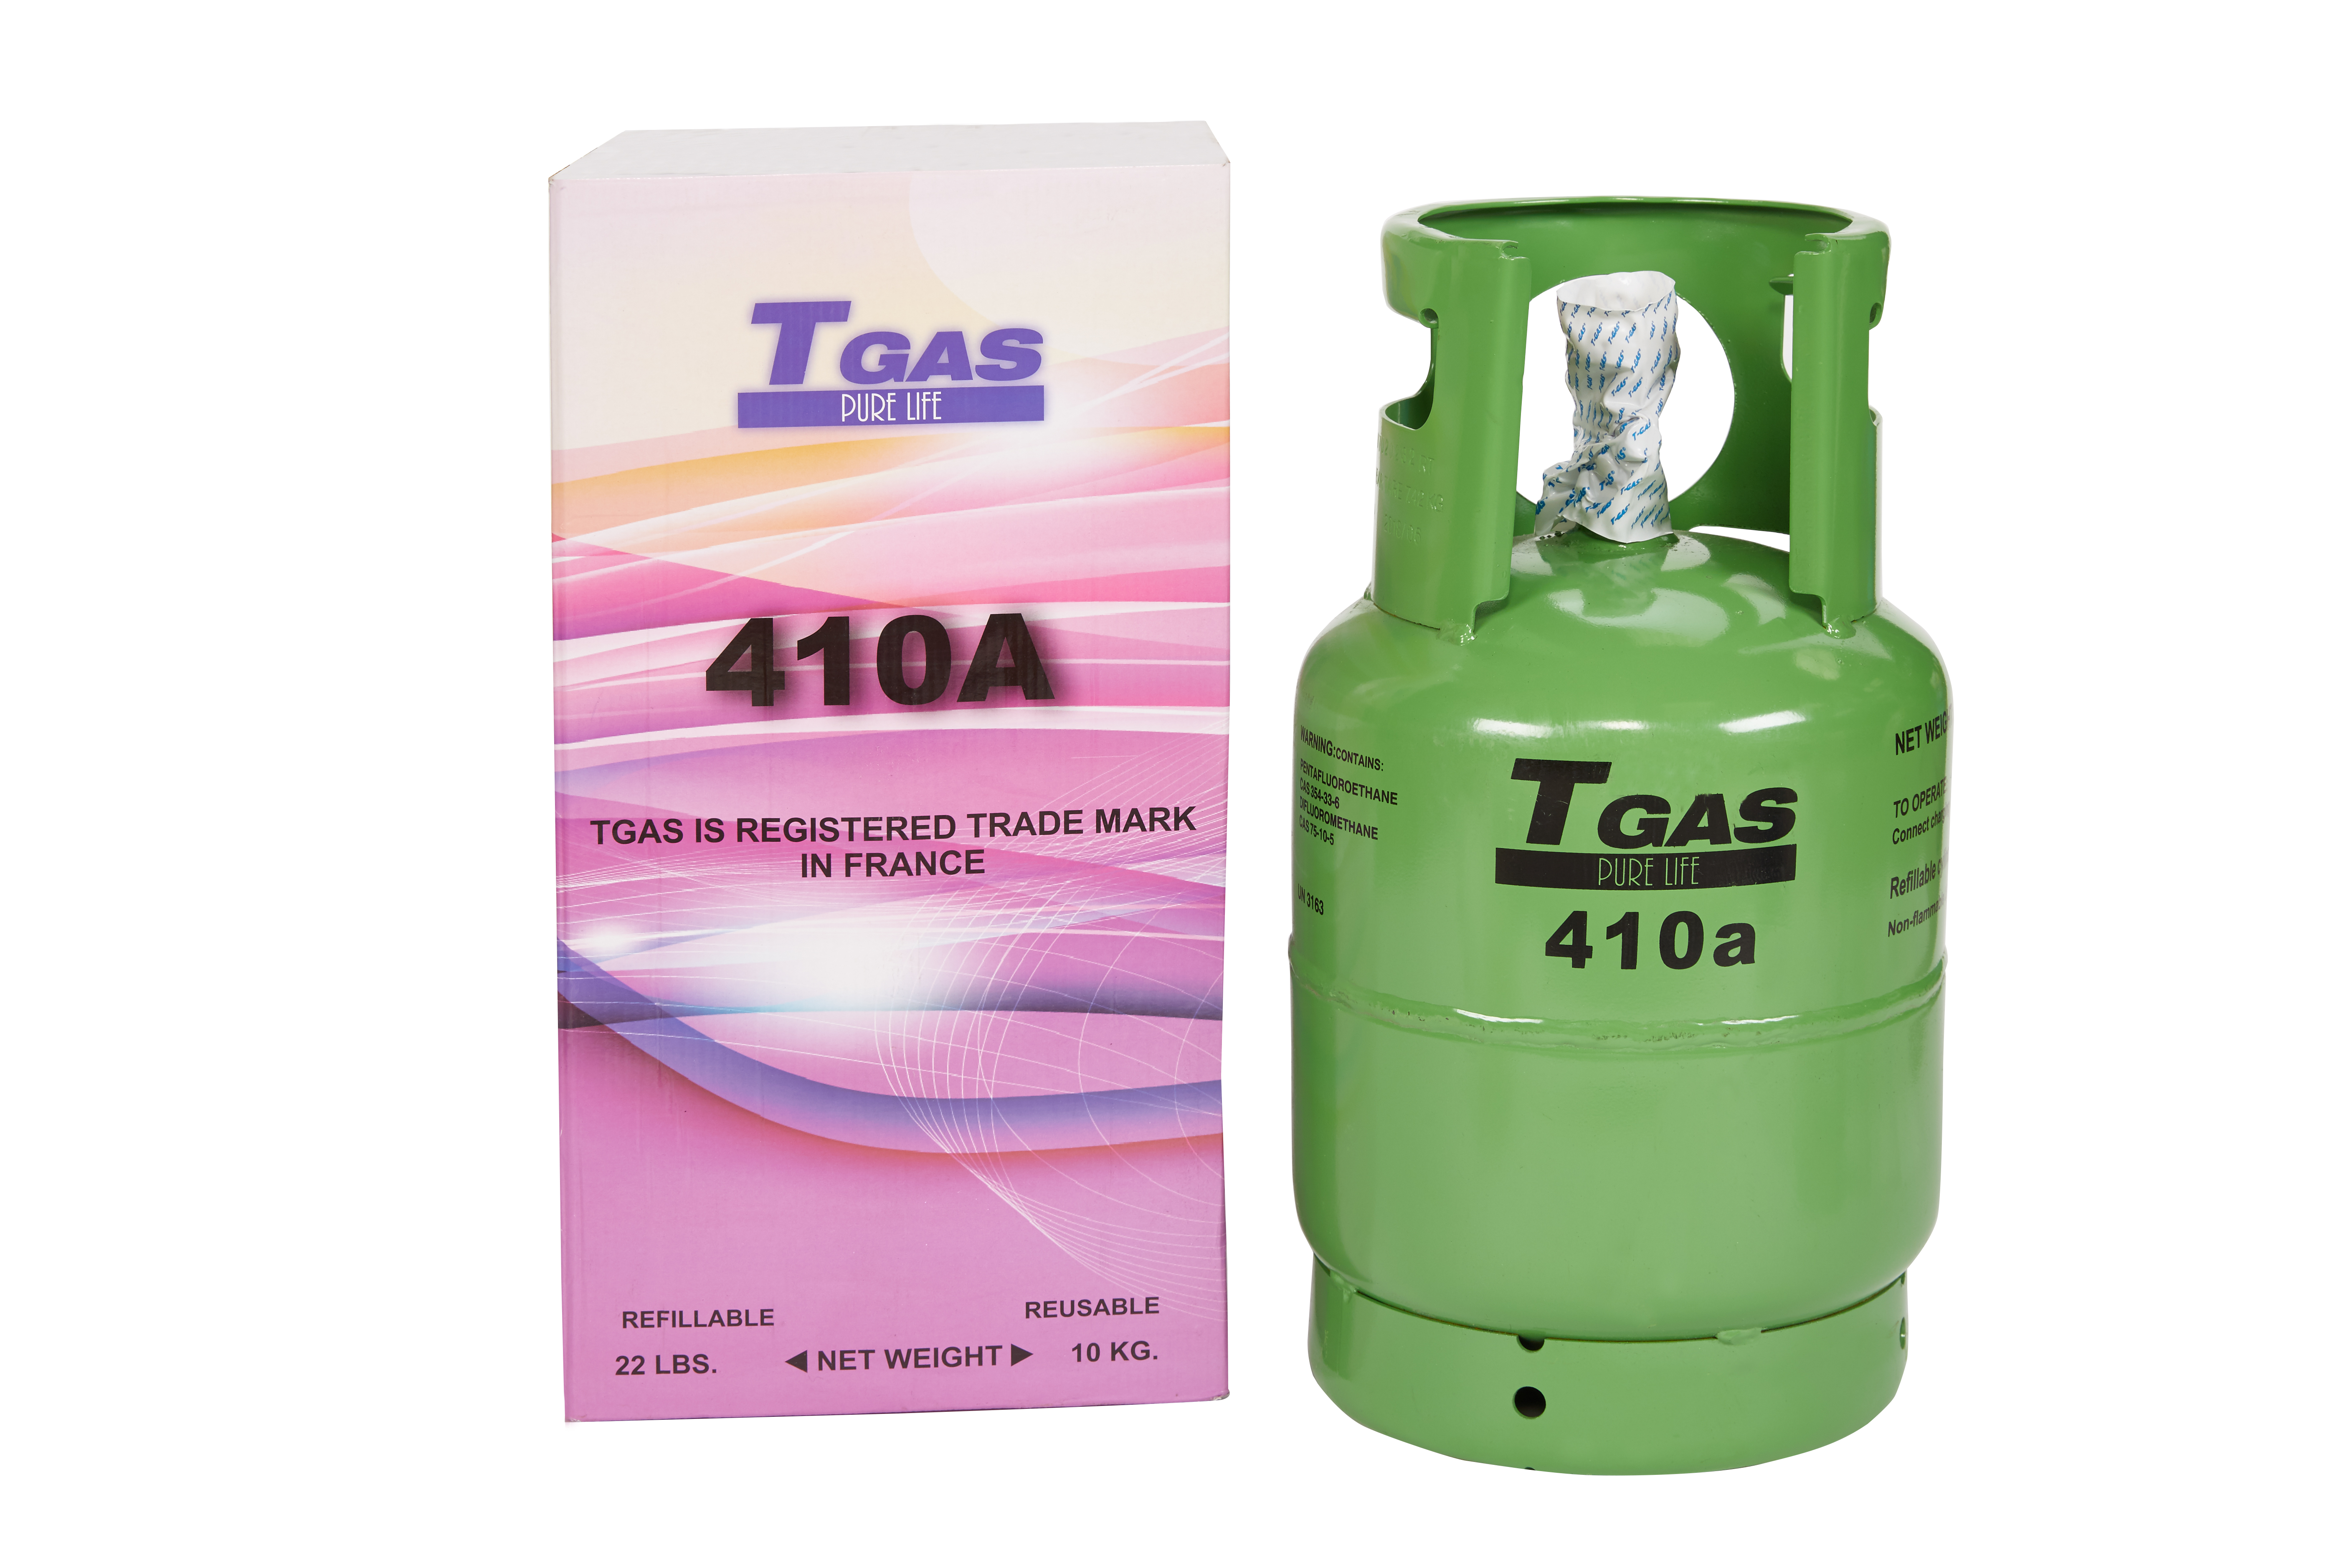 T GAS 410 A -10 KG. / REFILLABLE CYL